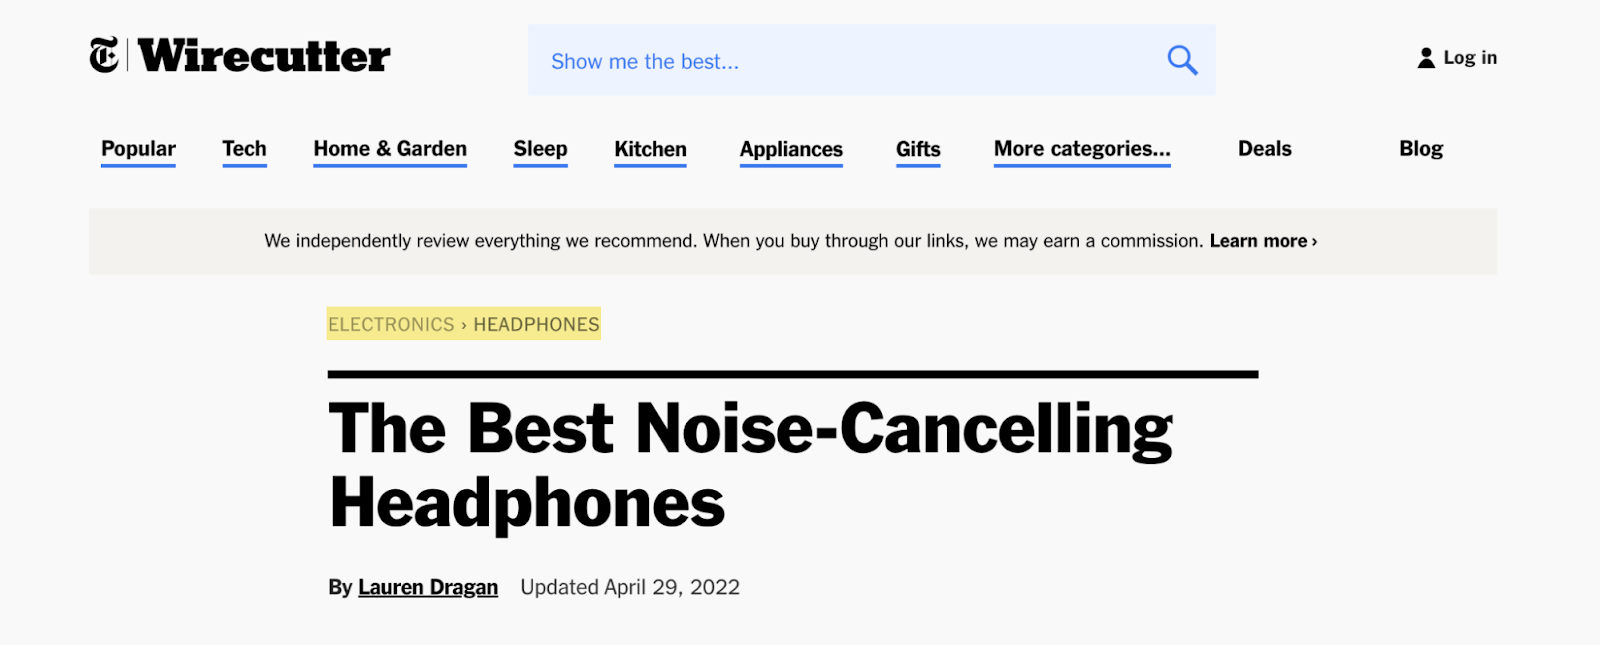 Site navigation showing "headphones" article is under the Headphones category that's under the Electronics category  